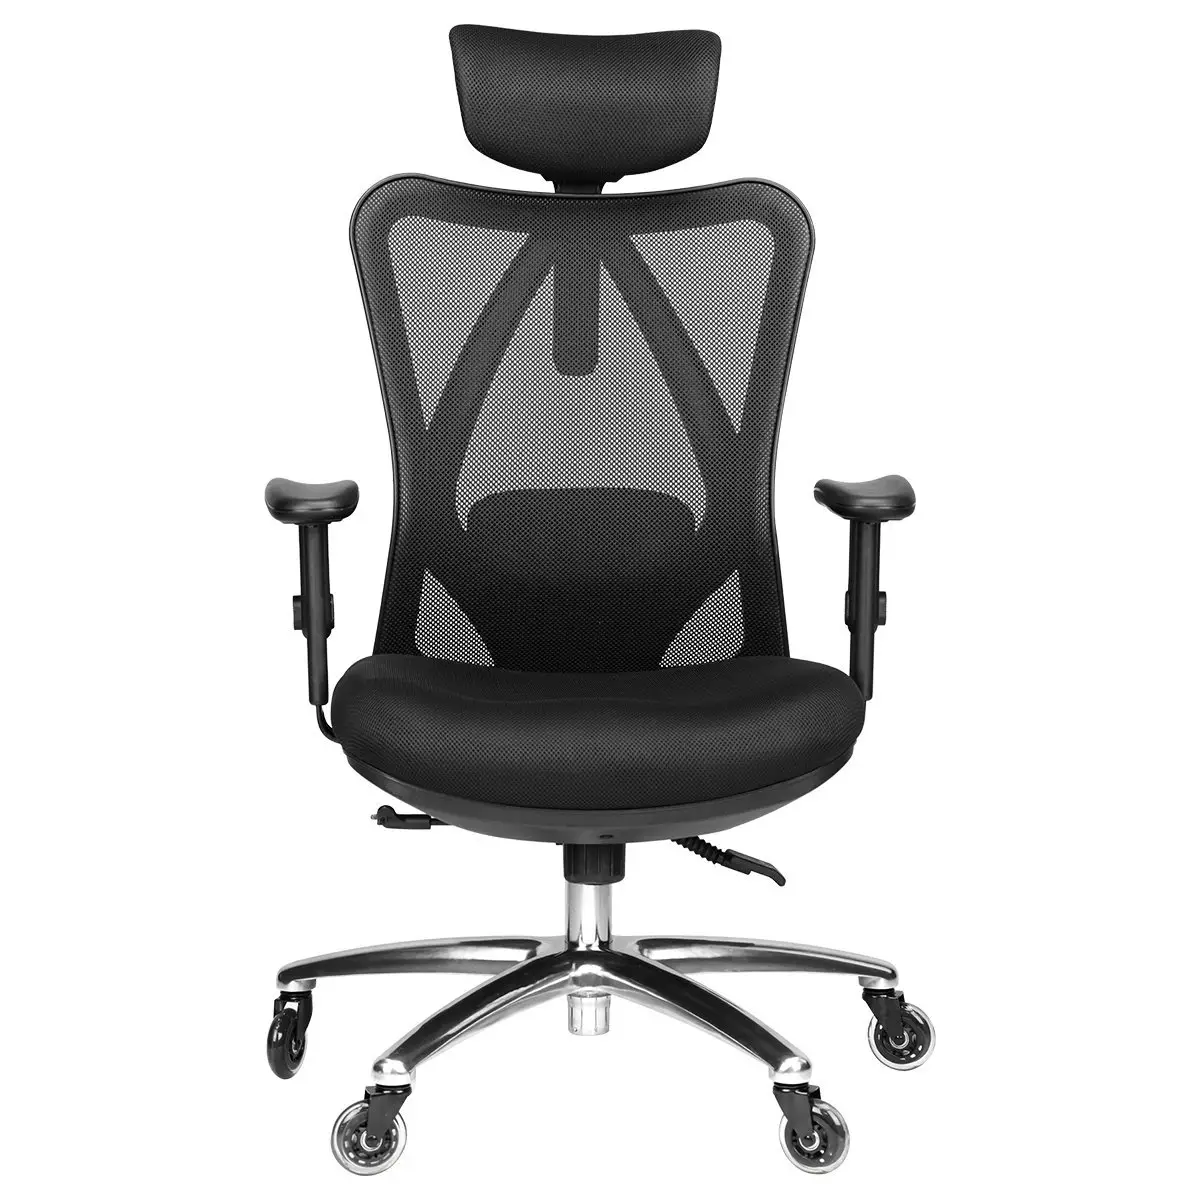 Best Office Chair for Back Pain Reviews â Best Office Chair for Lower ...